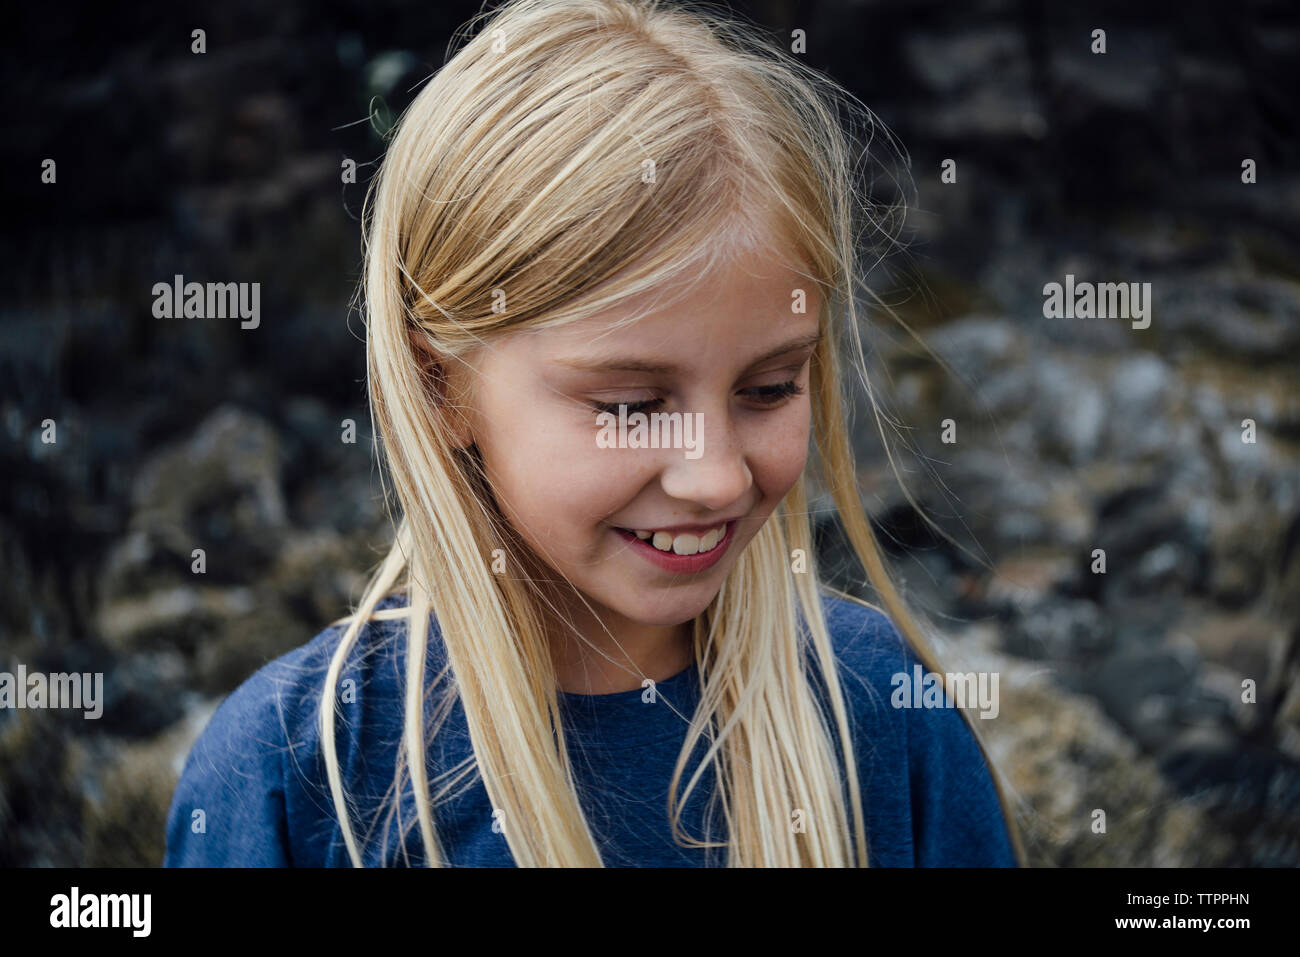 Close-up of smiling girl looking down Stock Photo